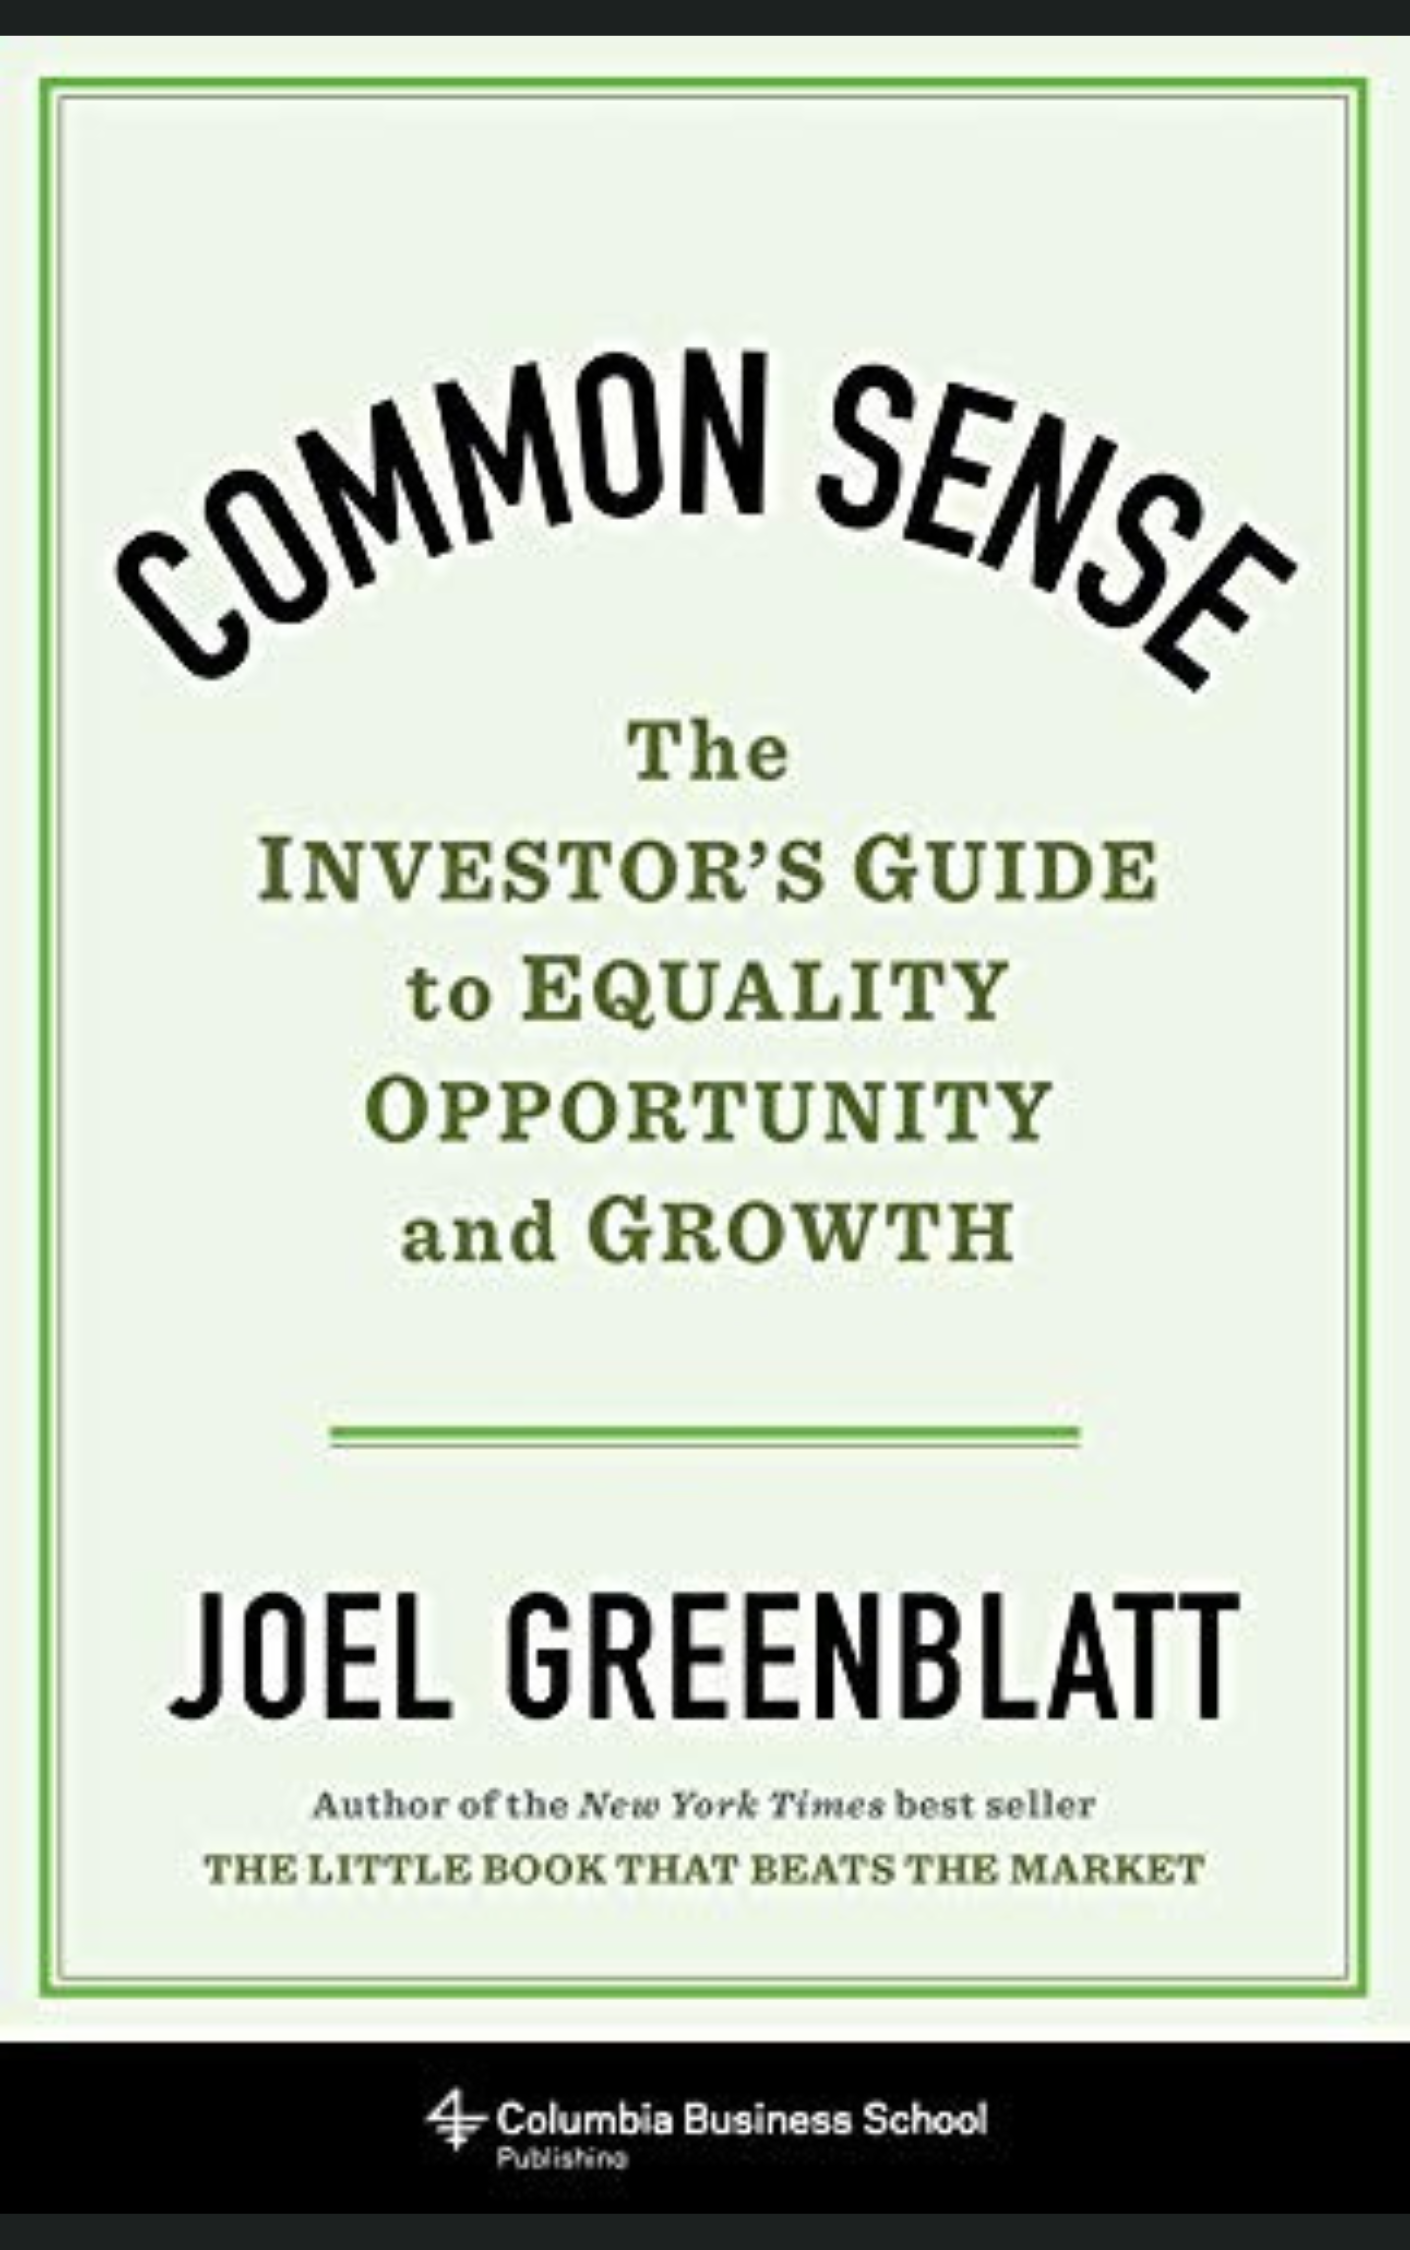 COMMON SENSE – THE INVESTOR`S GUIDE TO EQUALITY, OPPORTUNITY, AND GROWTH (HARDCOVER) - JOEL GREENBLATT